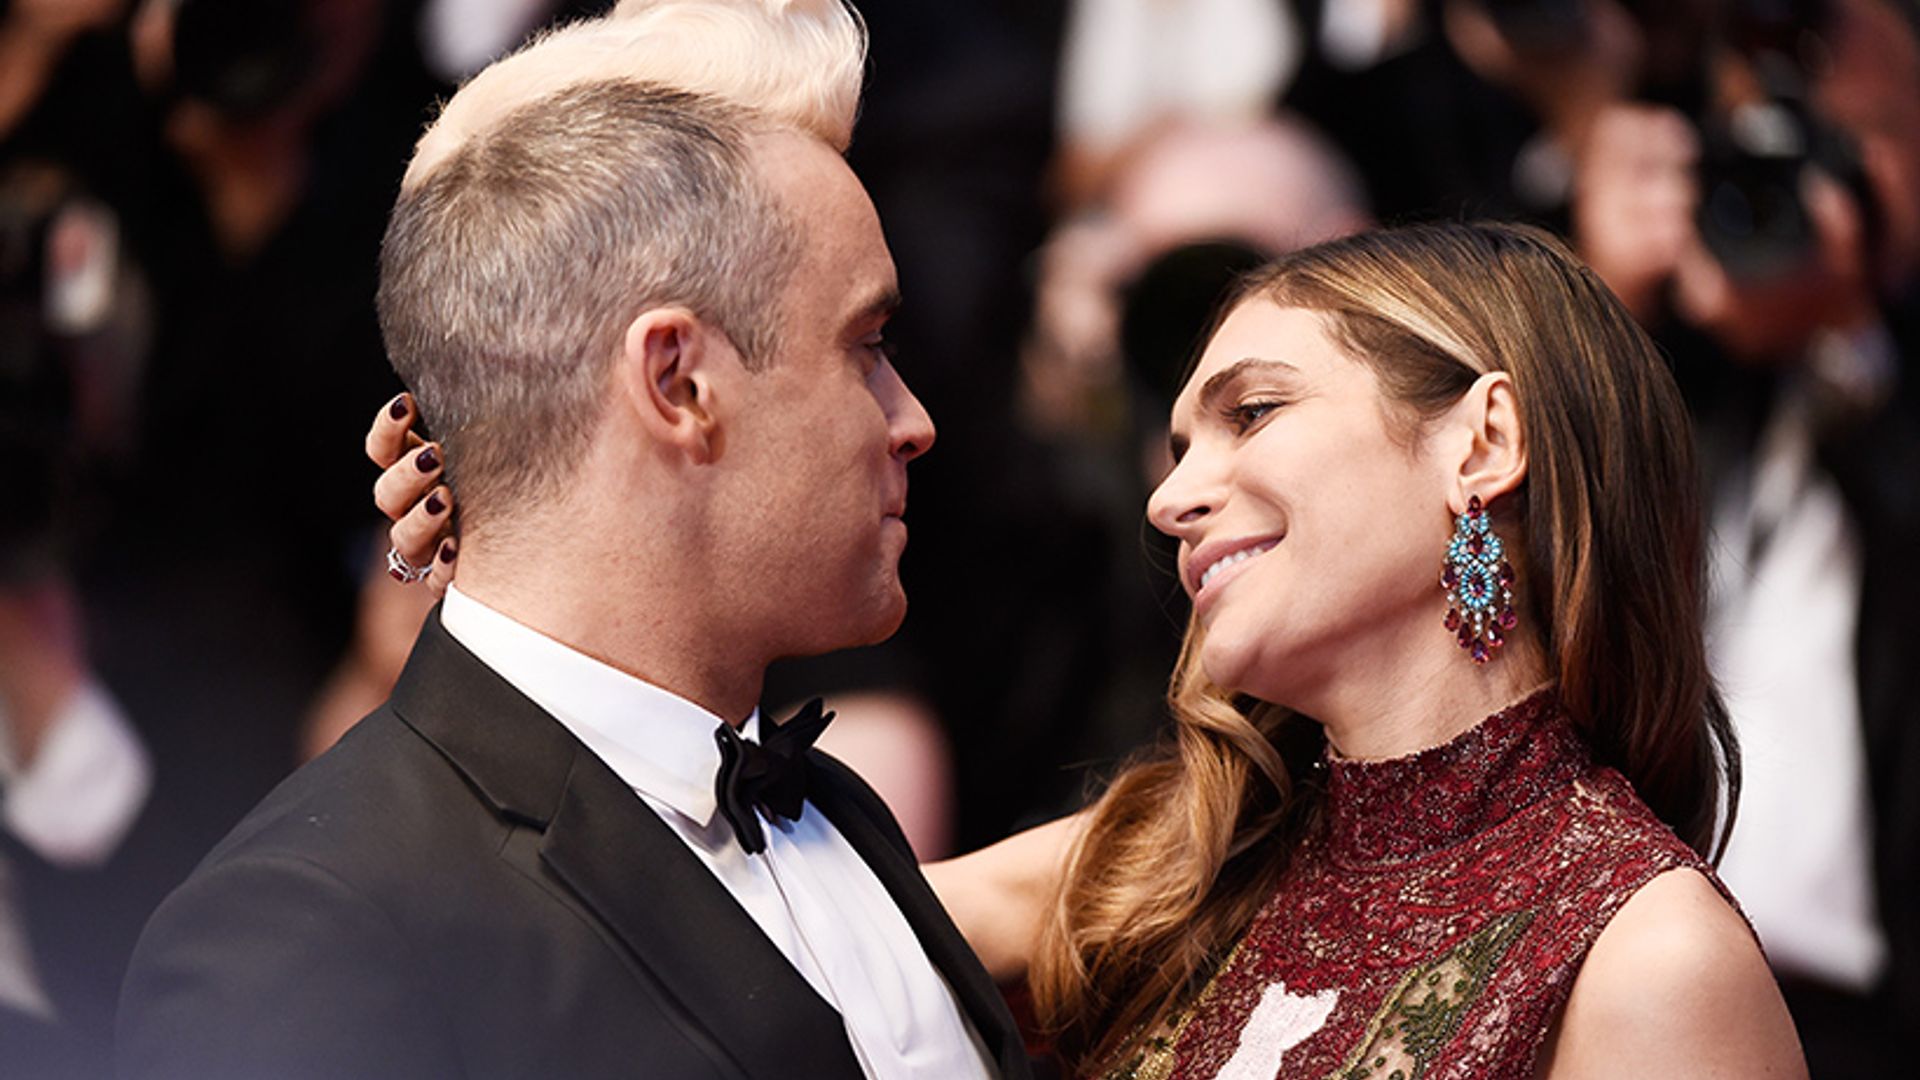 Robbie Williams' children sing along to his hit track – watch the cute video